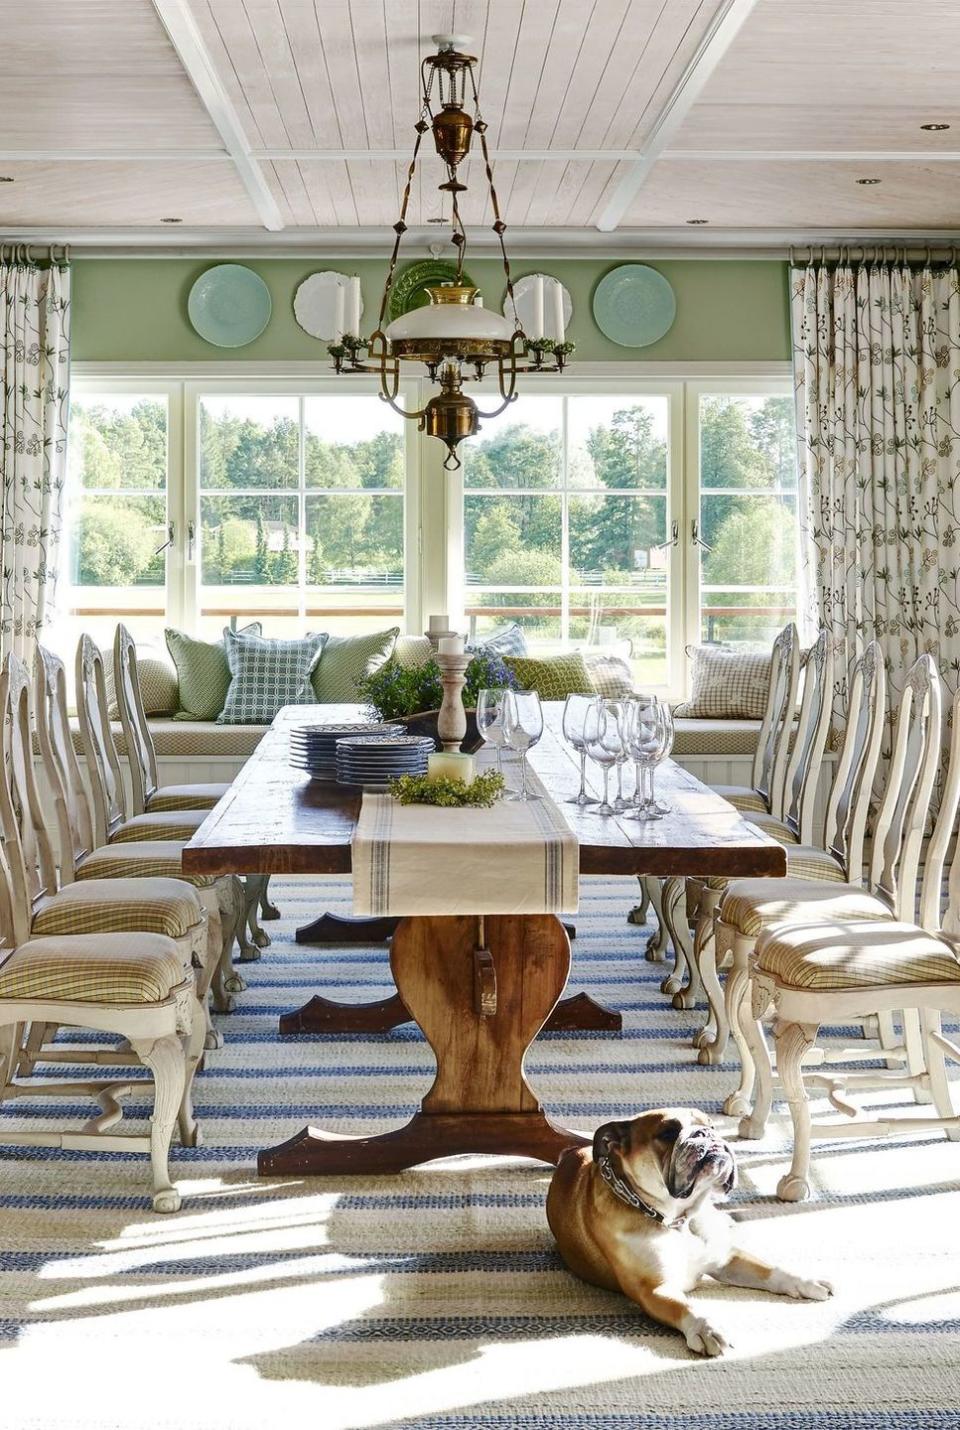 a dog sitting on the floor in a dining room with a chandelier and chairs